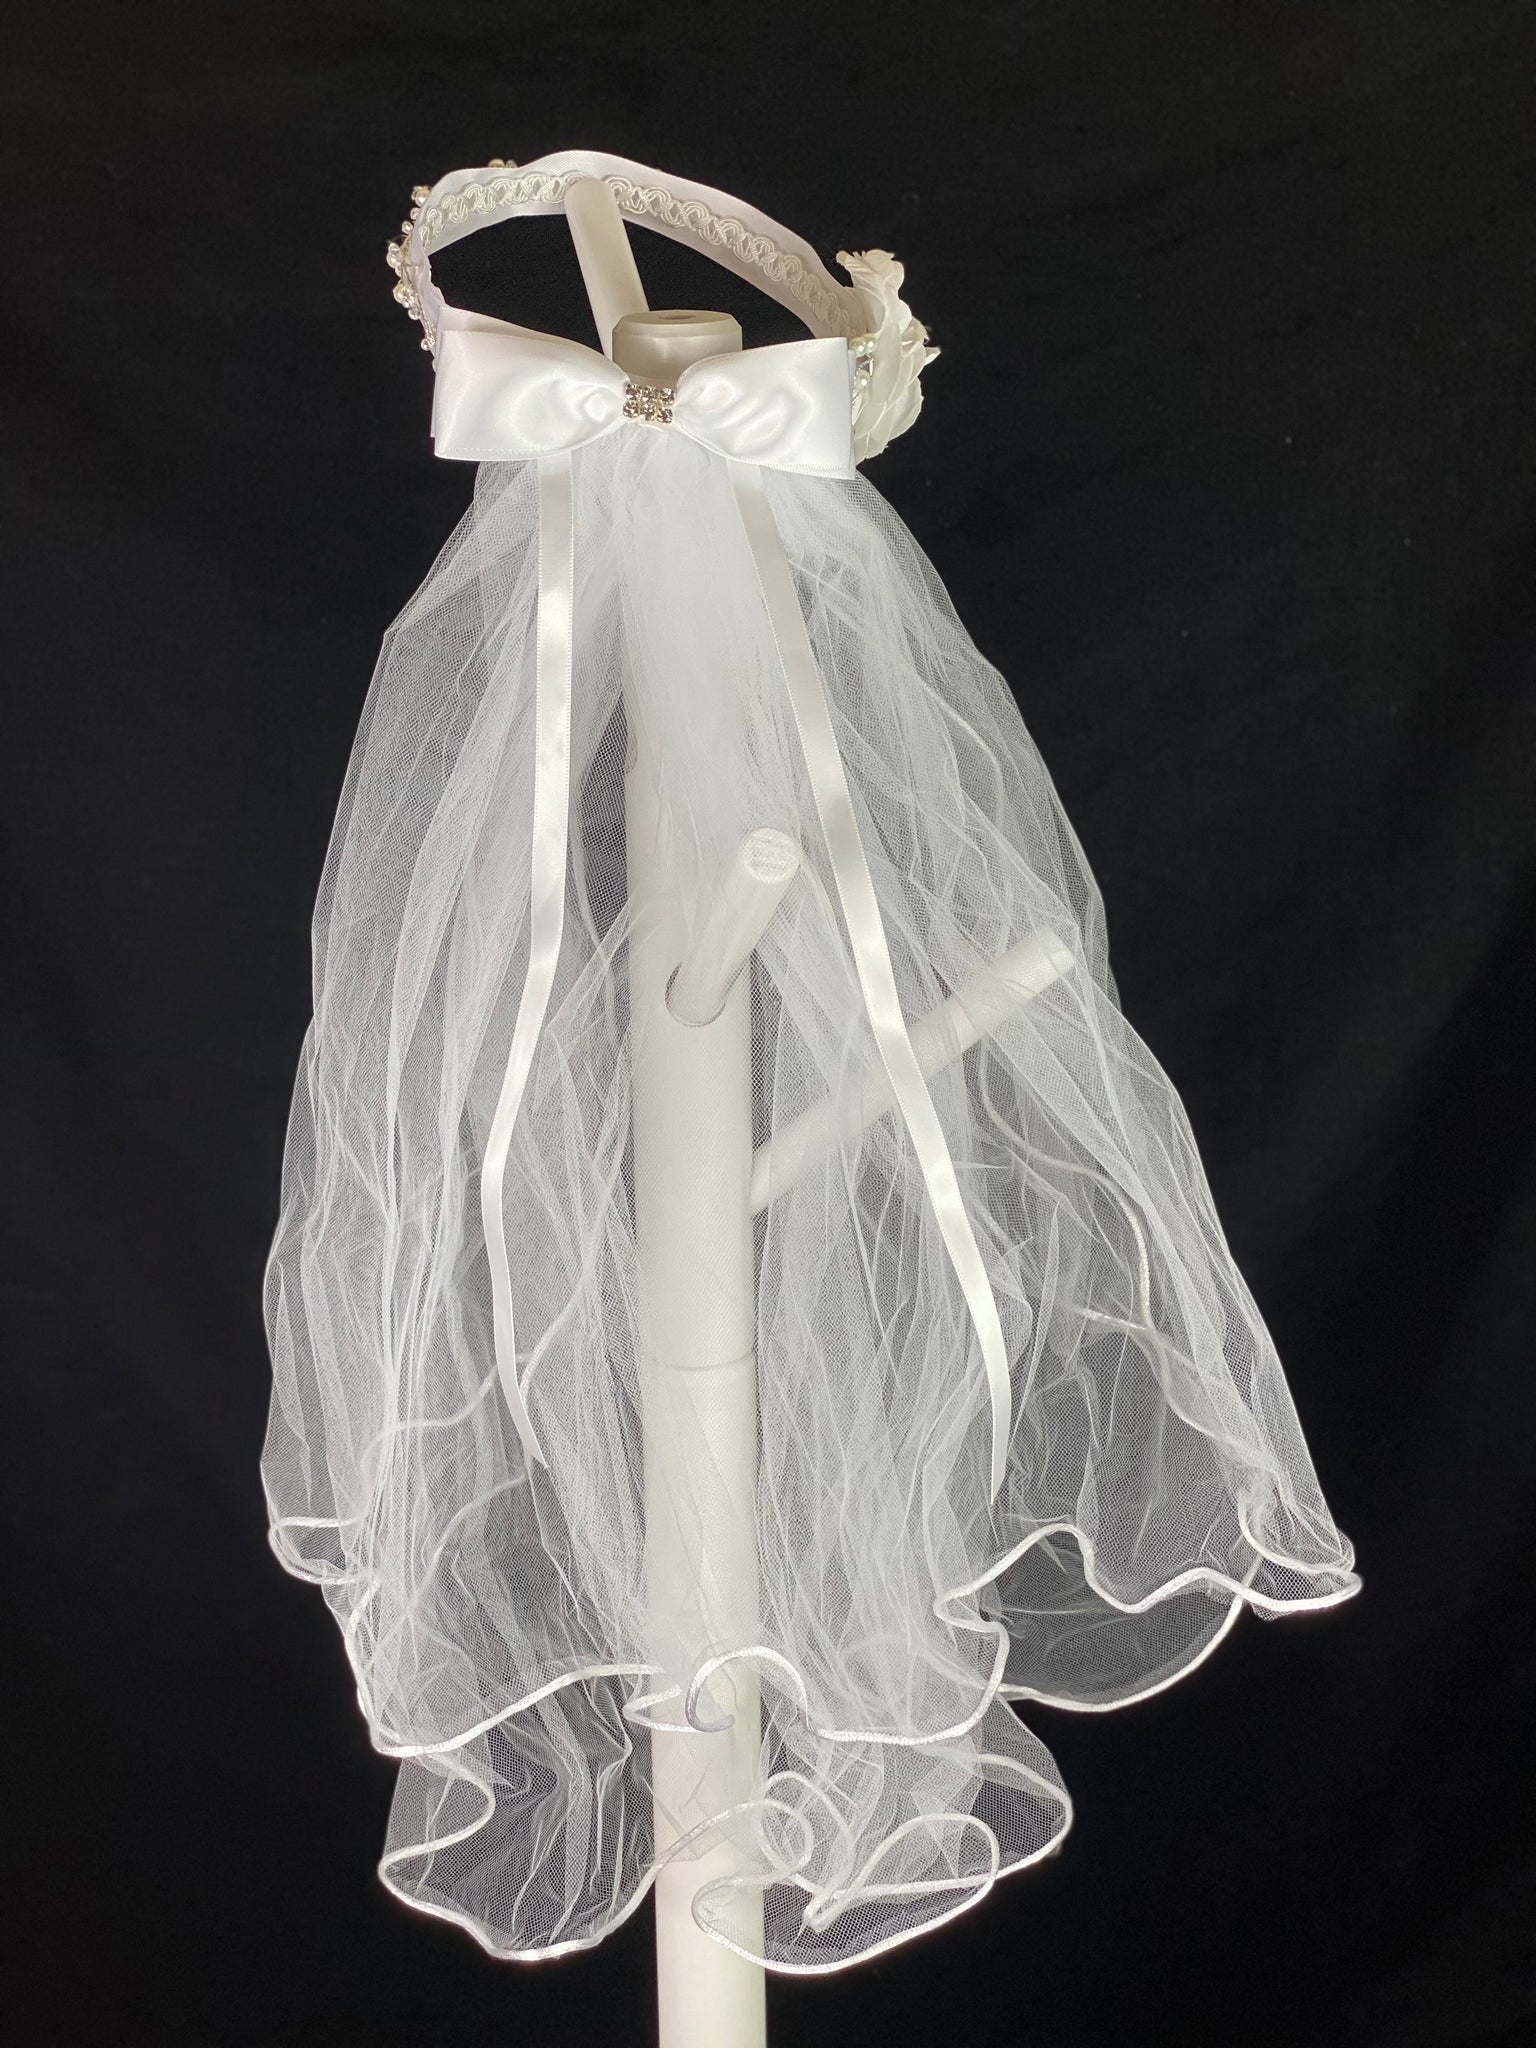 White Crown Veil with rhinestones.  Elegant soft 2 layer tulle veil with delicate hand stitched braided satin trim around the edge and handmade halo crown with with large white satin bow on back. Rhinestone vining on thick satin ribbon around crown. Large rose with rhinestone center on side of band.  This double layered veil reaches approximately 24" long, with a crown diameter of 6". Veil has 2" long, 3" wide, comb to secure it in place. 